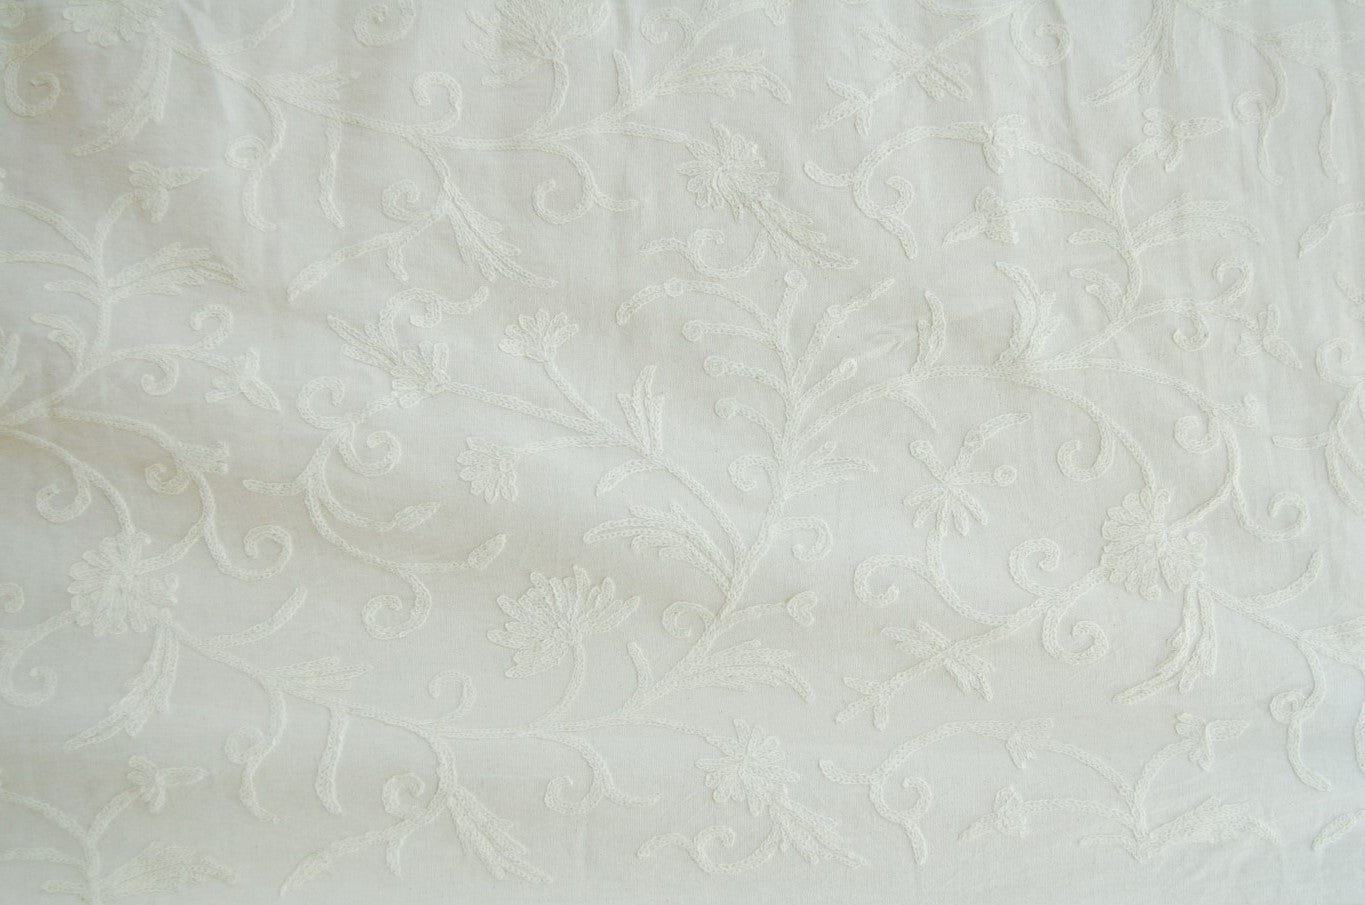 Cotton Hand Embroidery Fabric - White - Stitched Modern